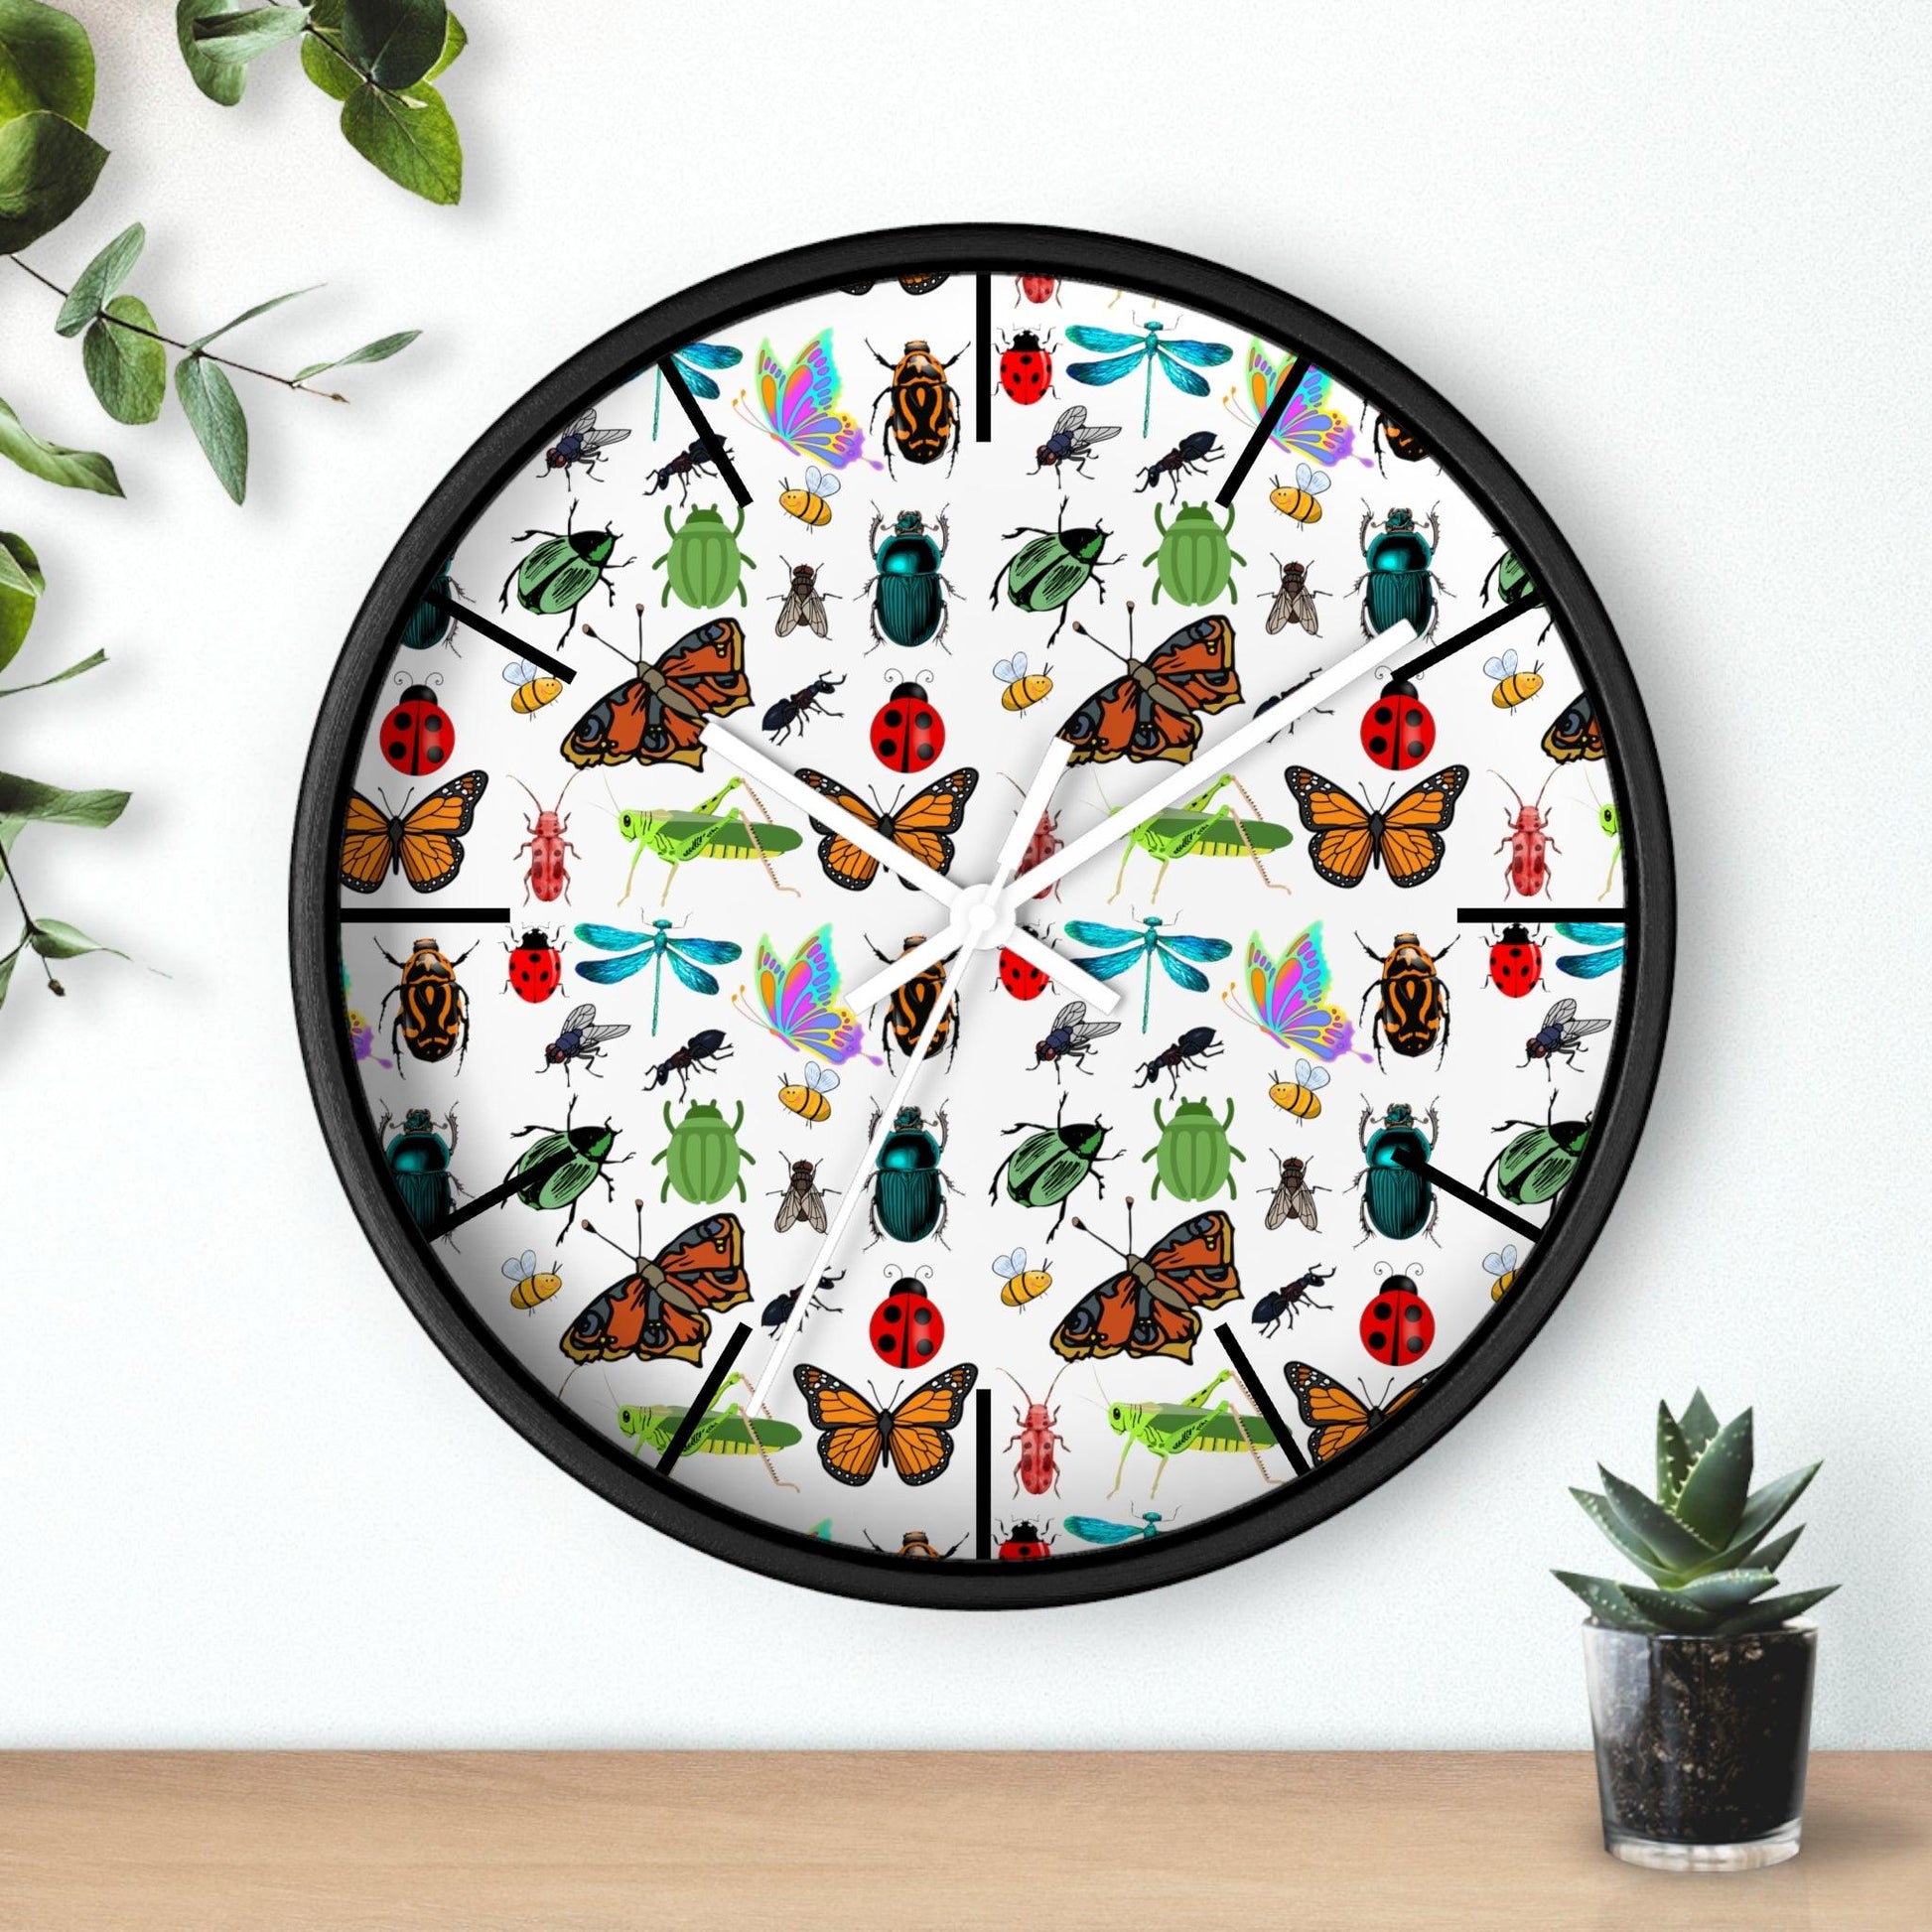 Bug Wall Clock Wall Clock Insects Wall Clock Home Decor Gift House Warming Gift - Unique Gift Farmhouse Clocks For Wall Living Room Bedroom - Giftsmojo